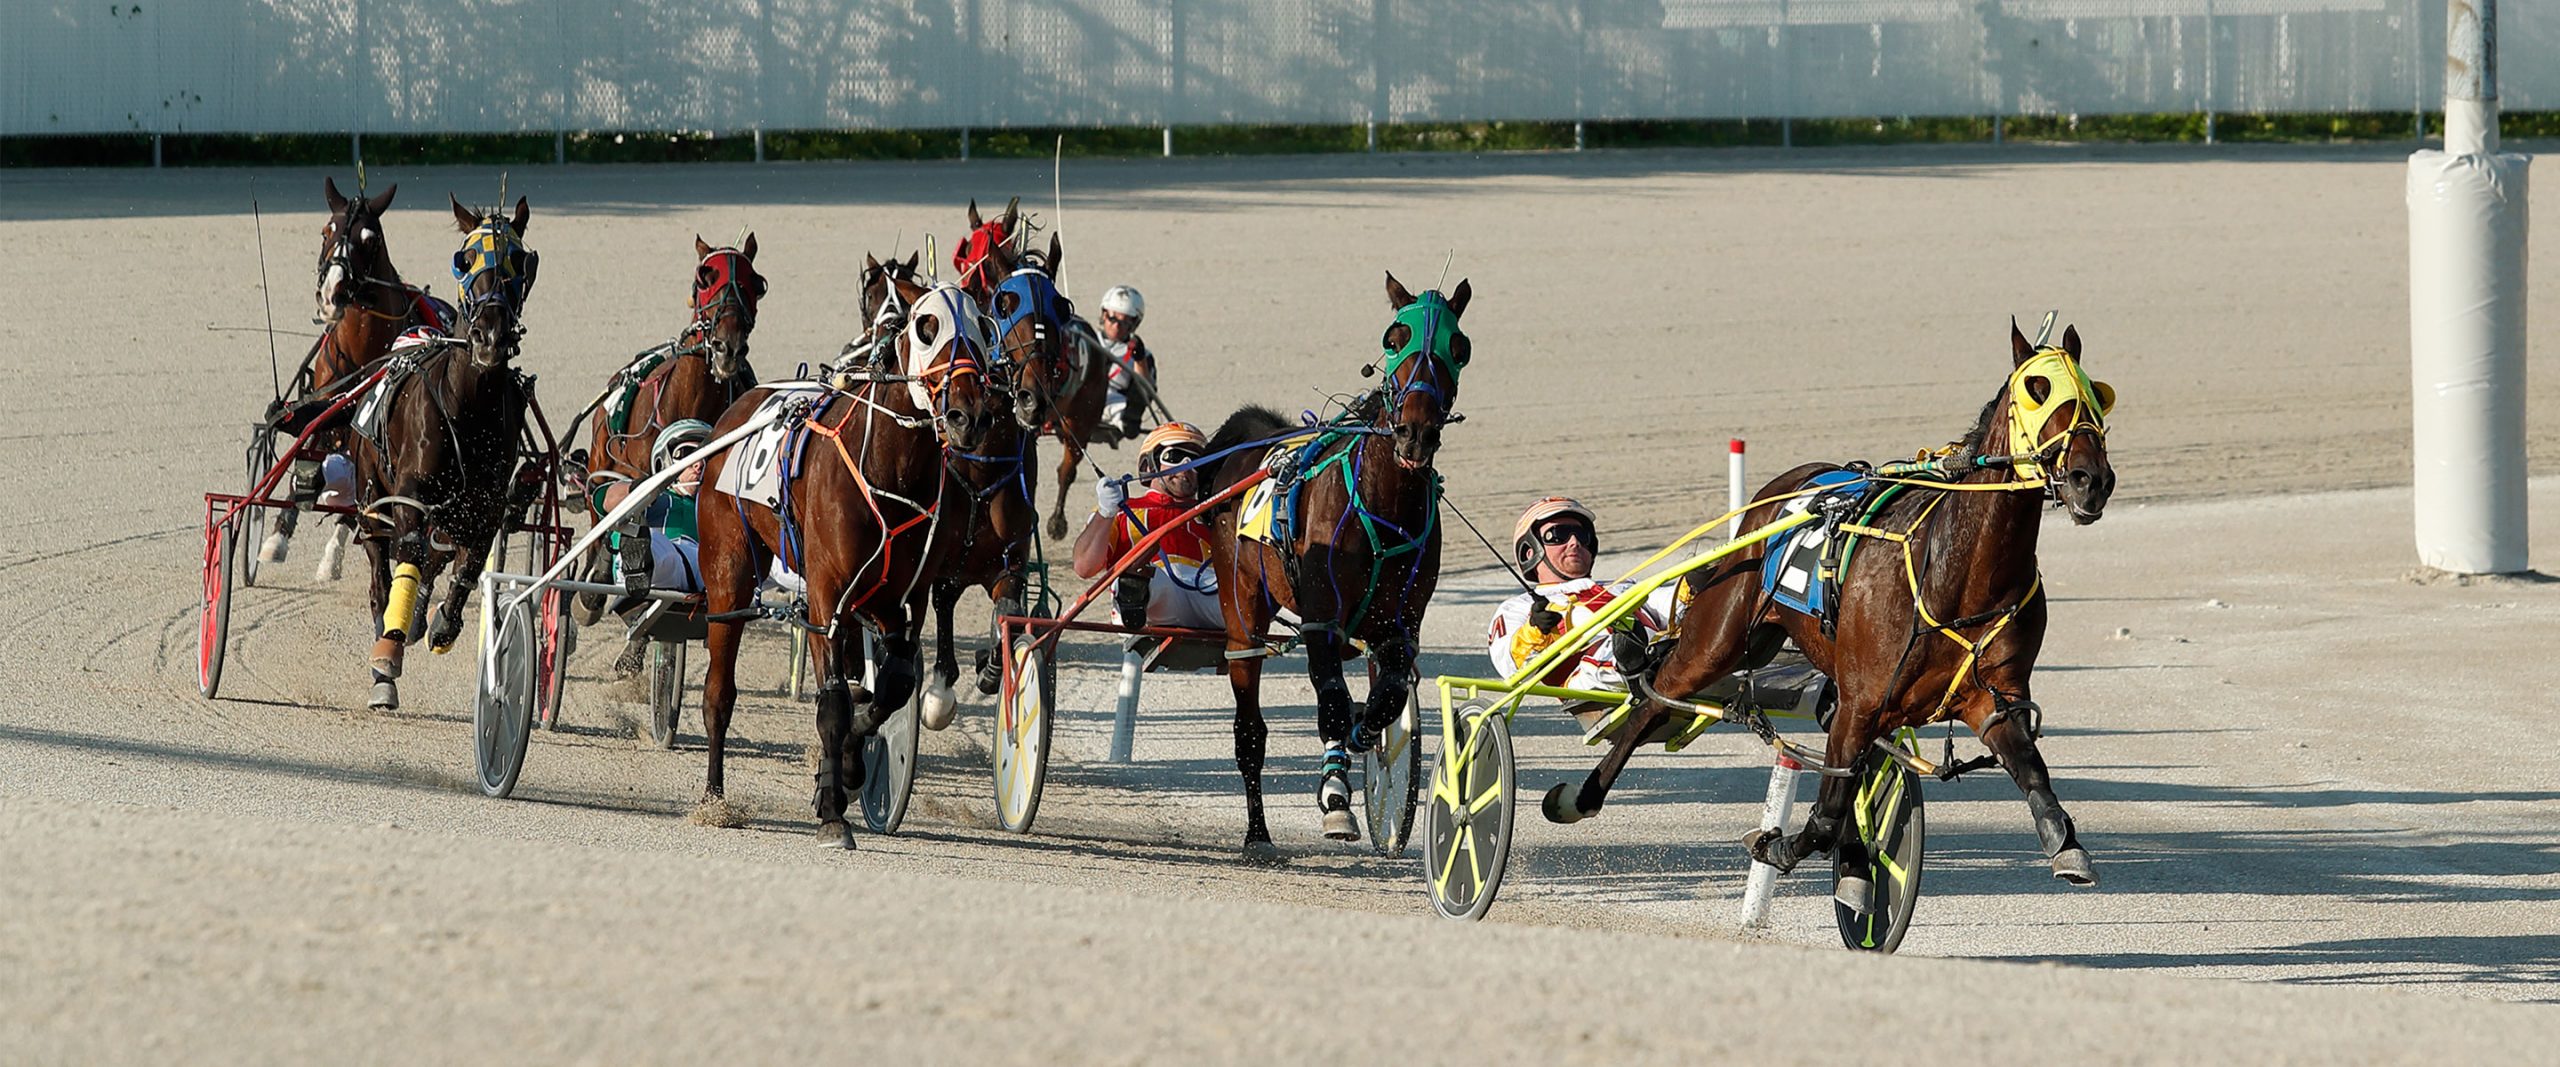 friday-harness-racing-action-from-northfield-park-w-shannon-sugar-doyle